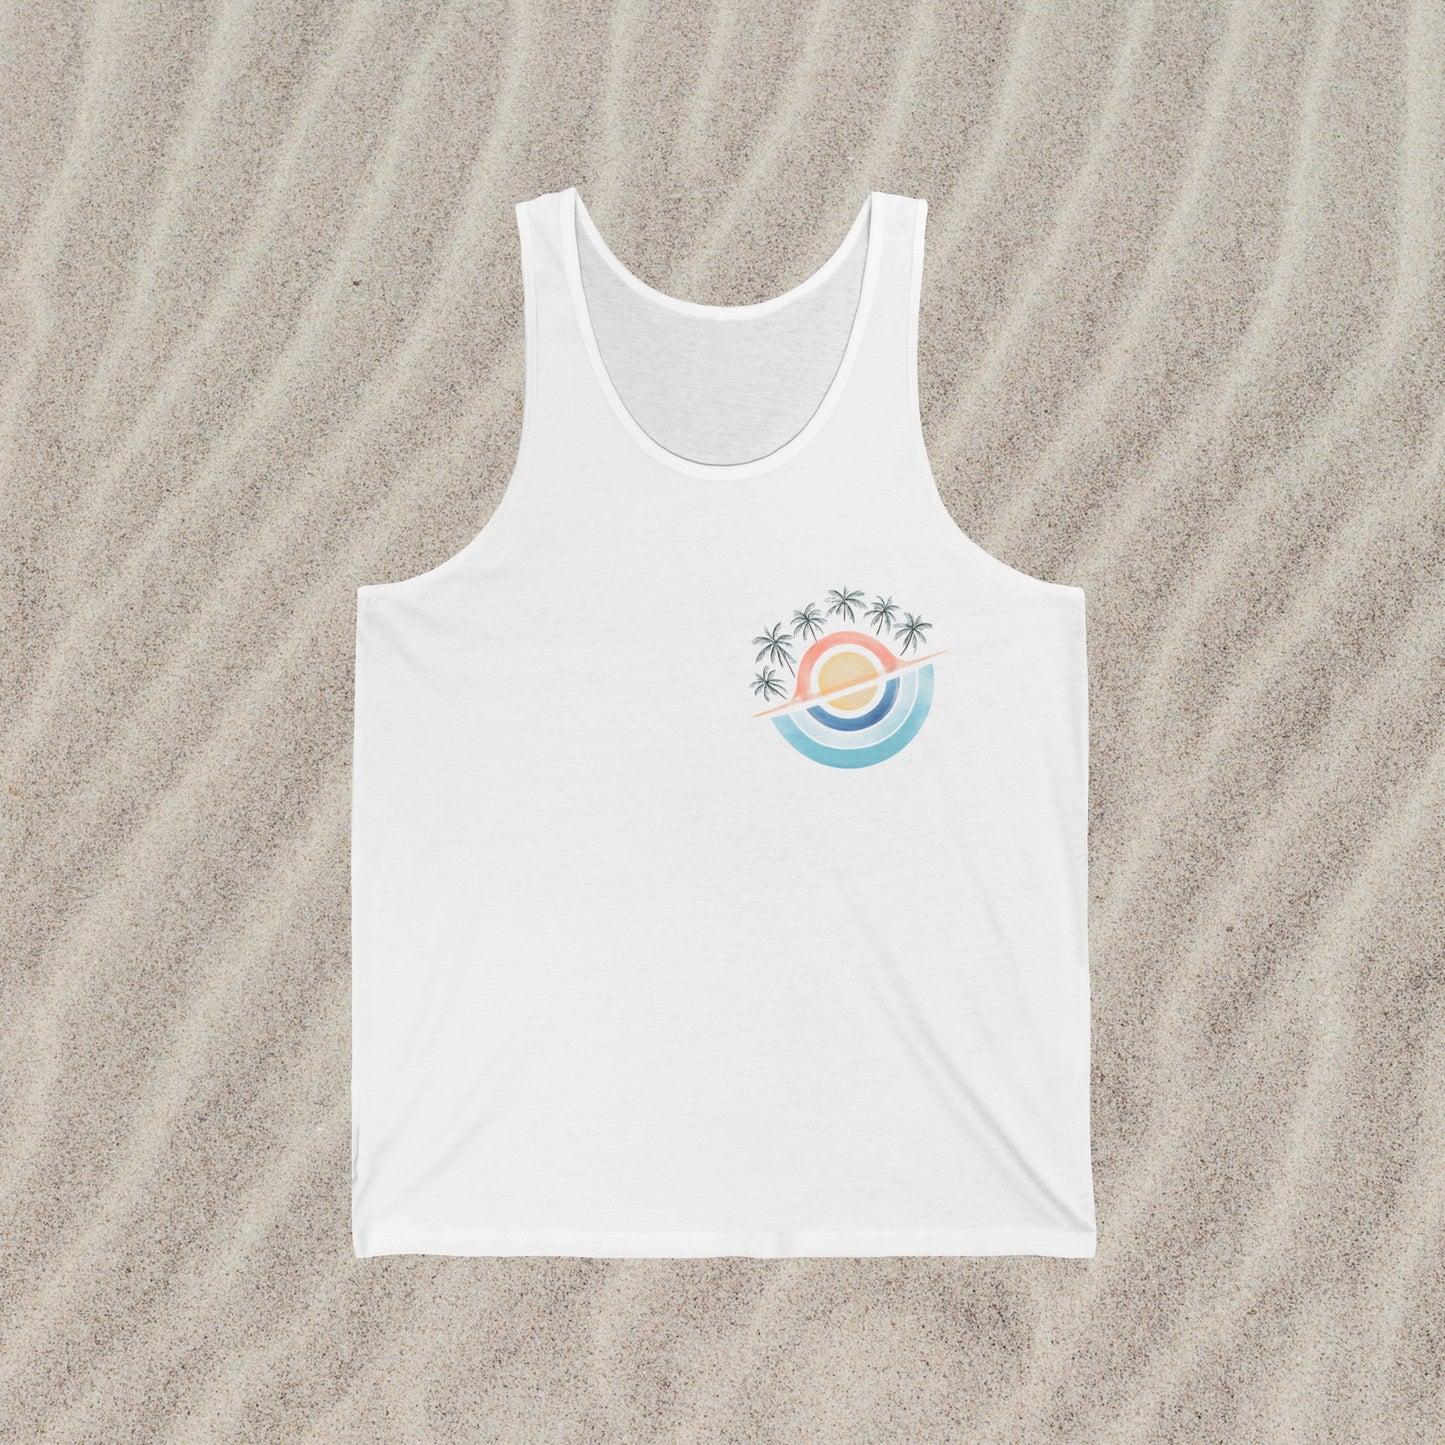 THEORY "Summer Vibes" Tank Top Men's